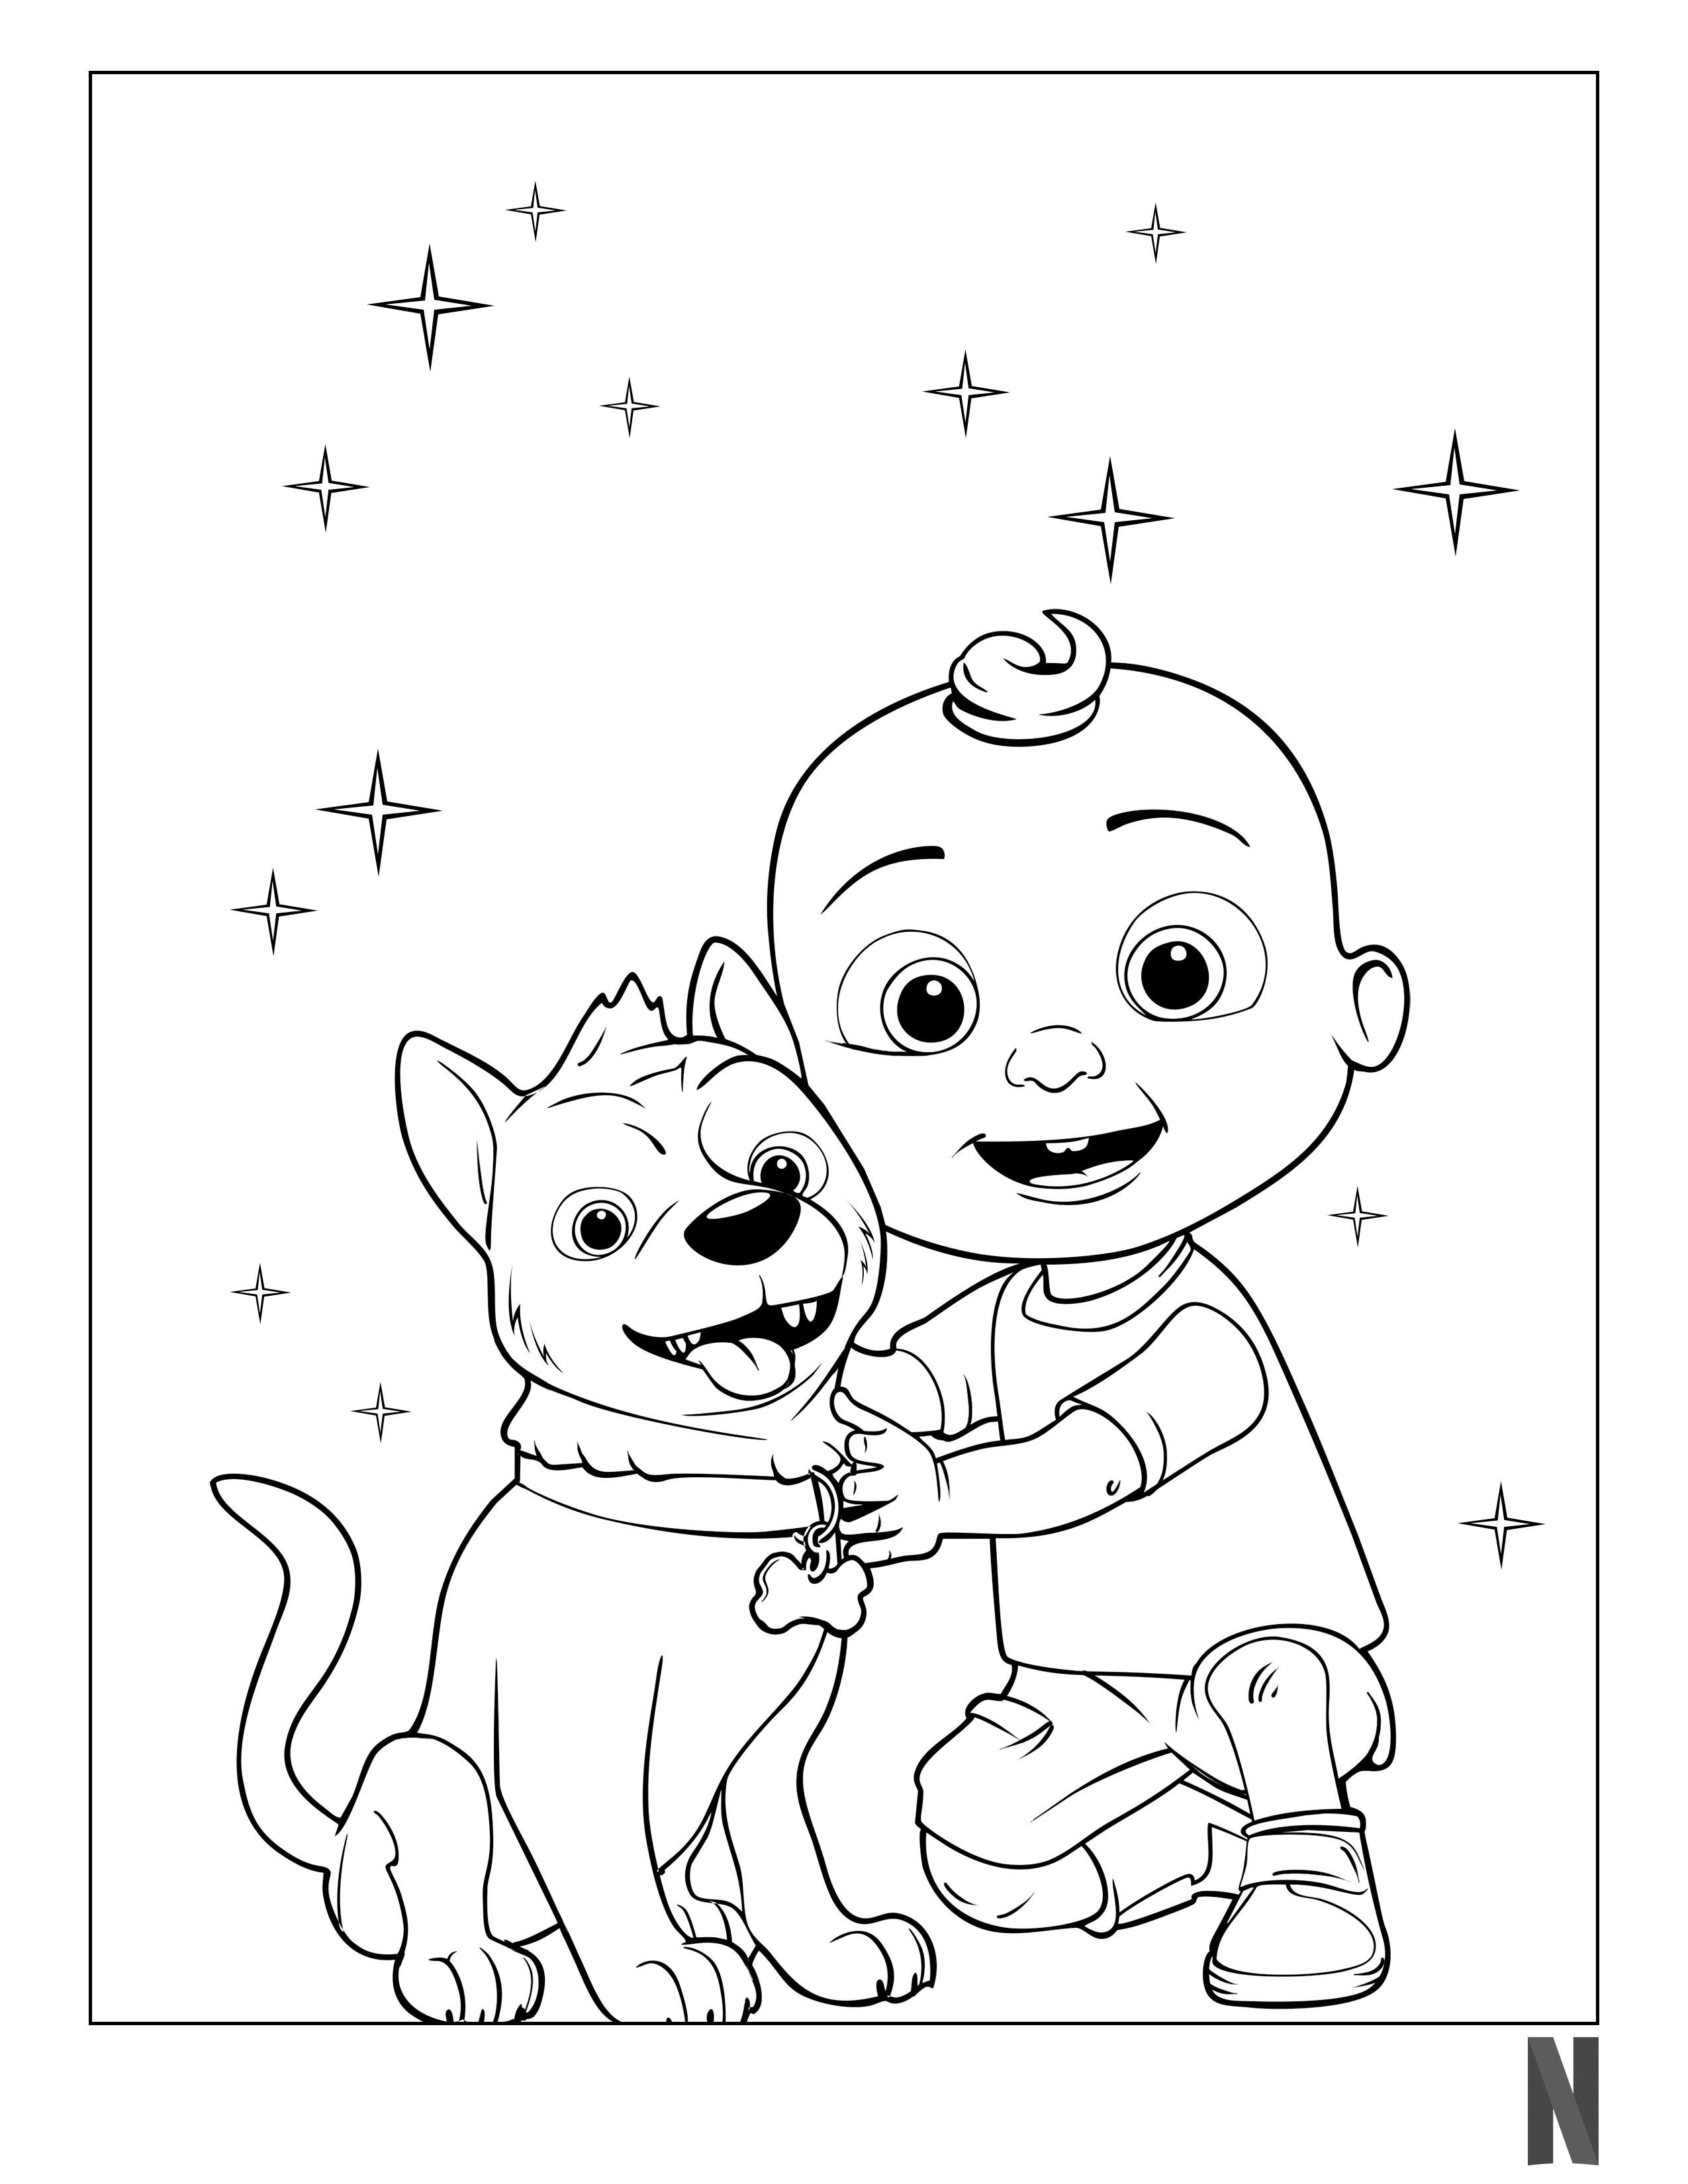 Coelon coloring page animal coloring pages coloring pages dog coloring page